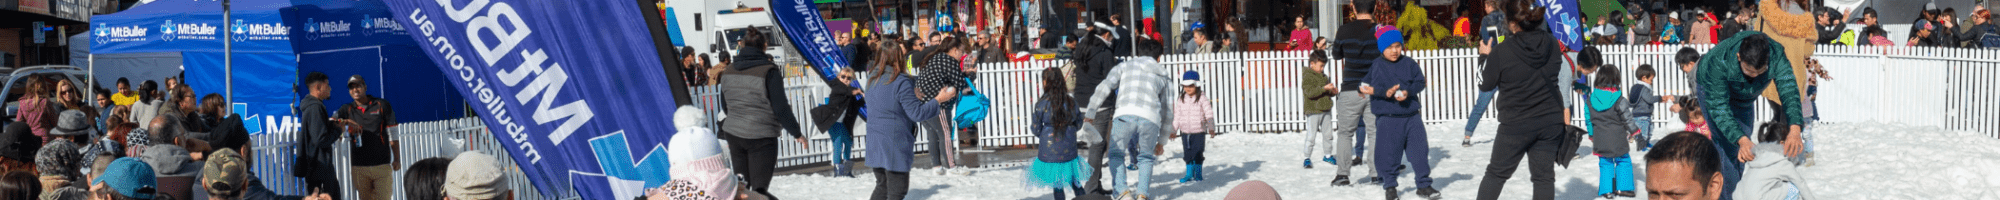 Crowds enjoying playing in the snow at Snow Fest 2019. 